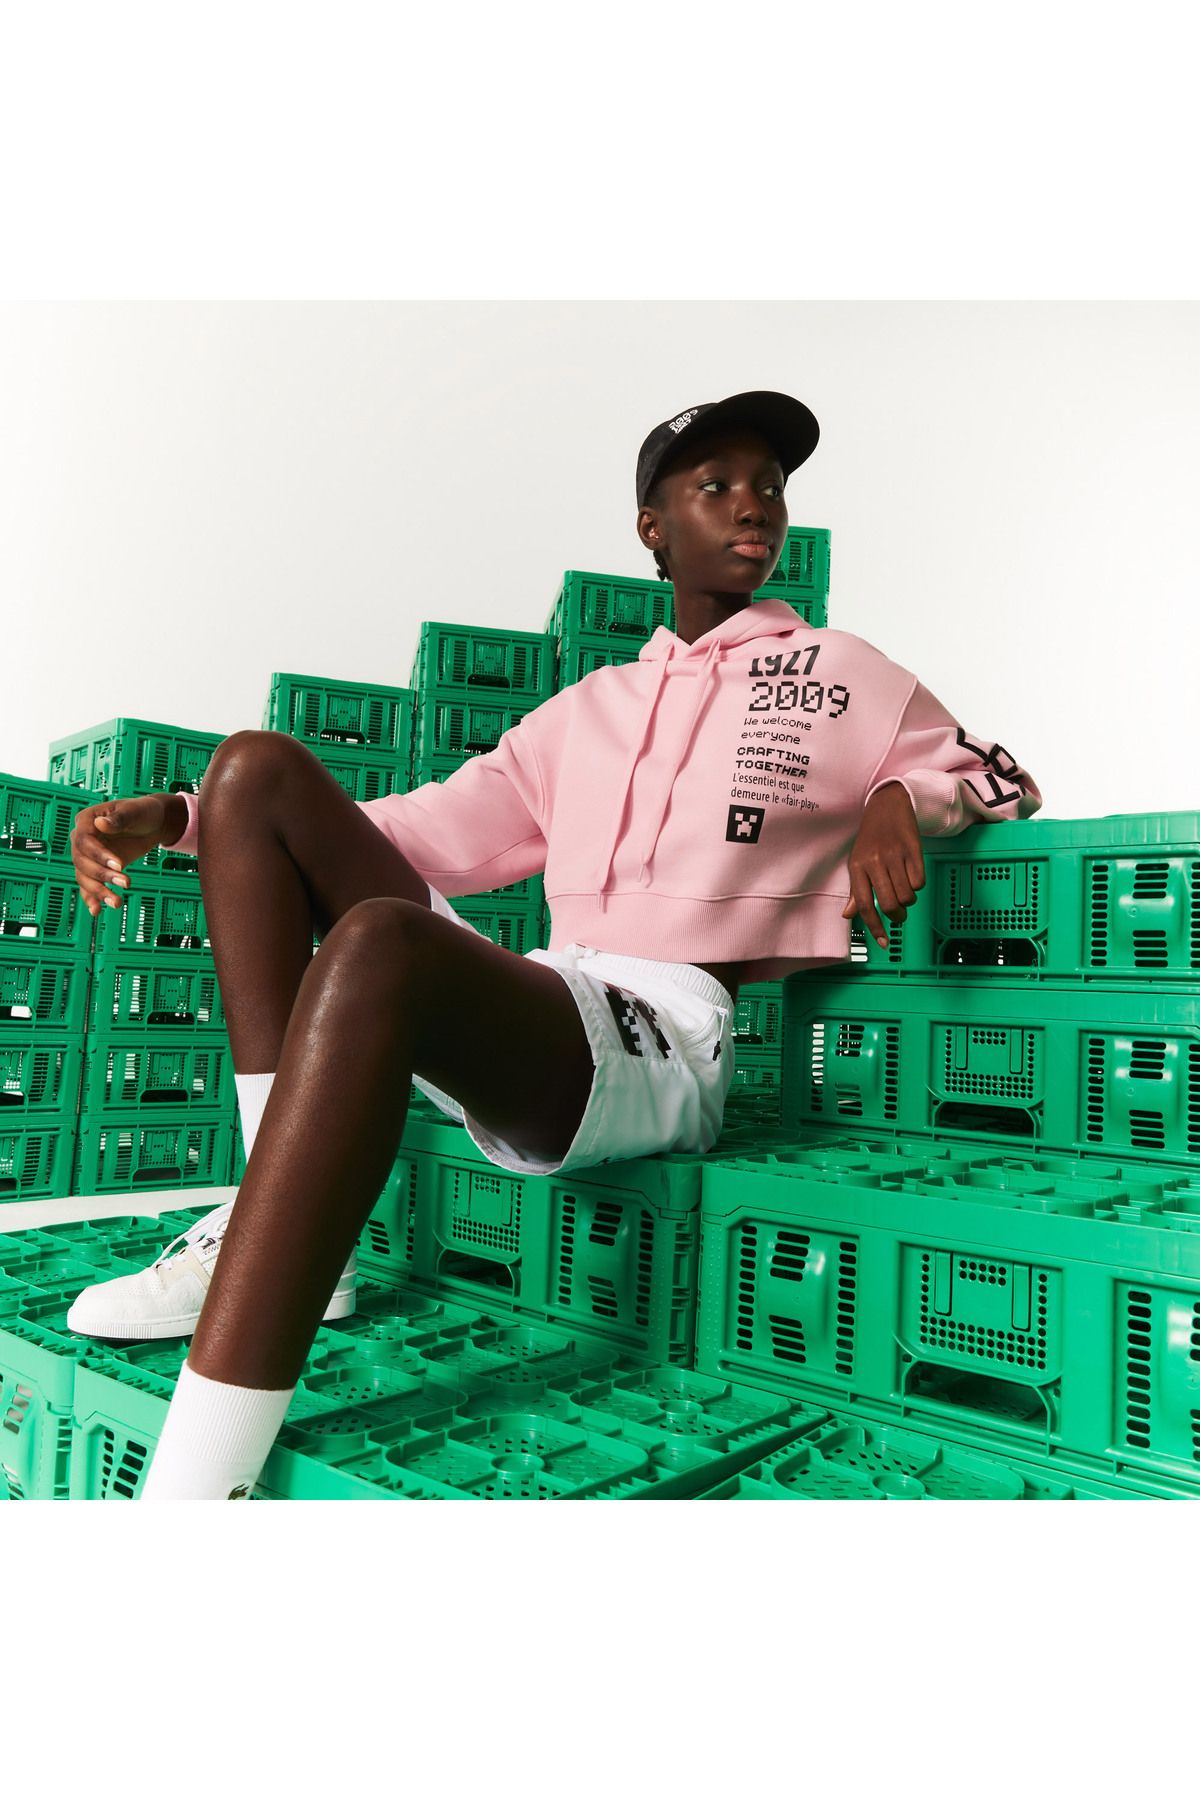 Lacoste X Minecraft Fit Hasted Sweatryrt